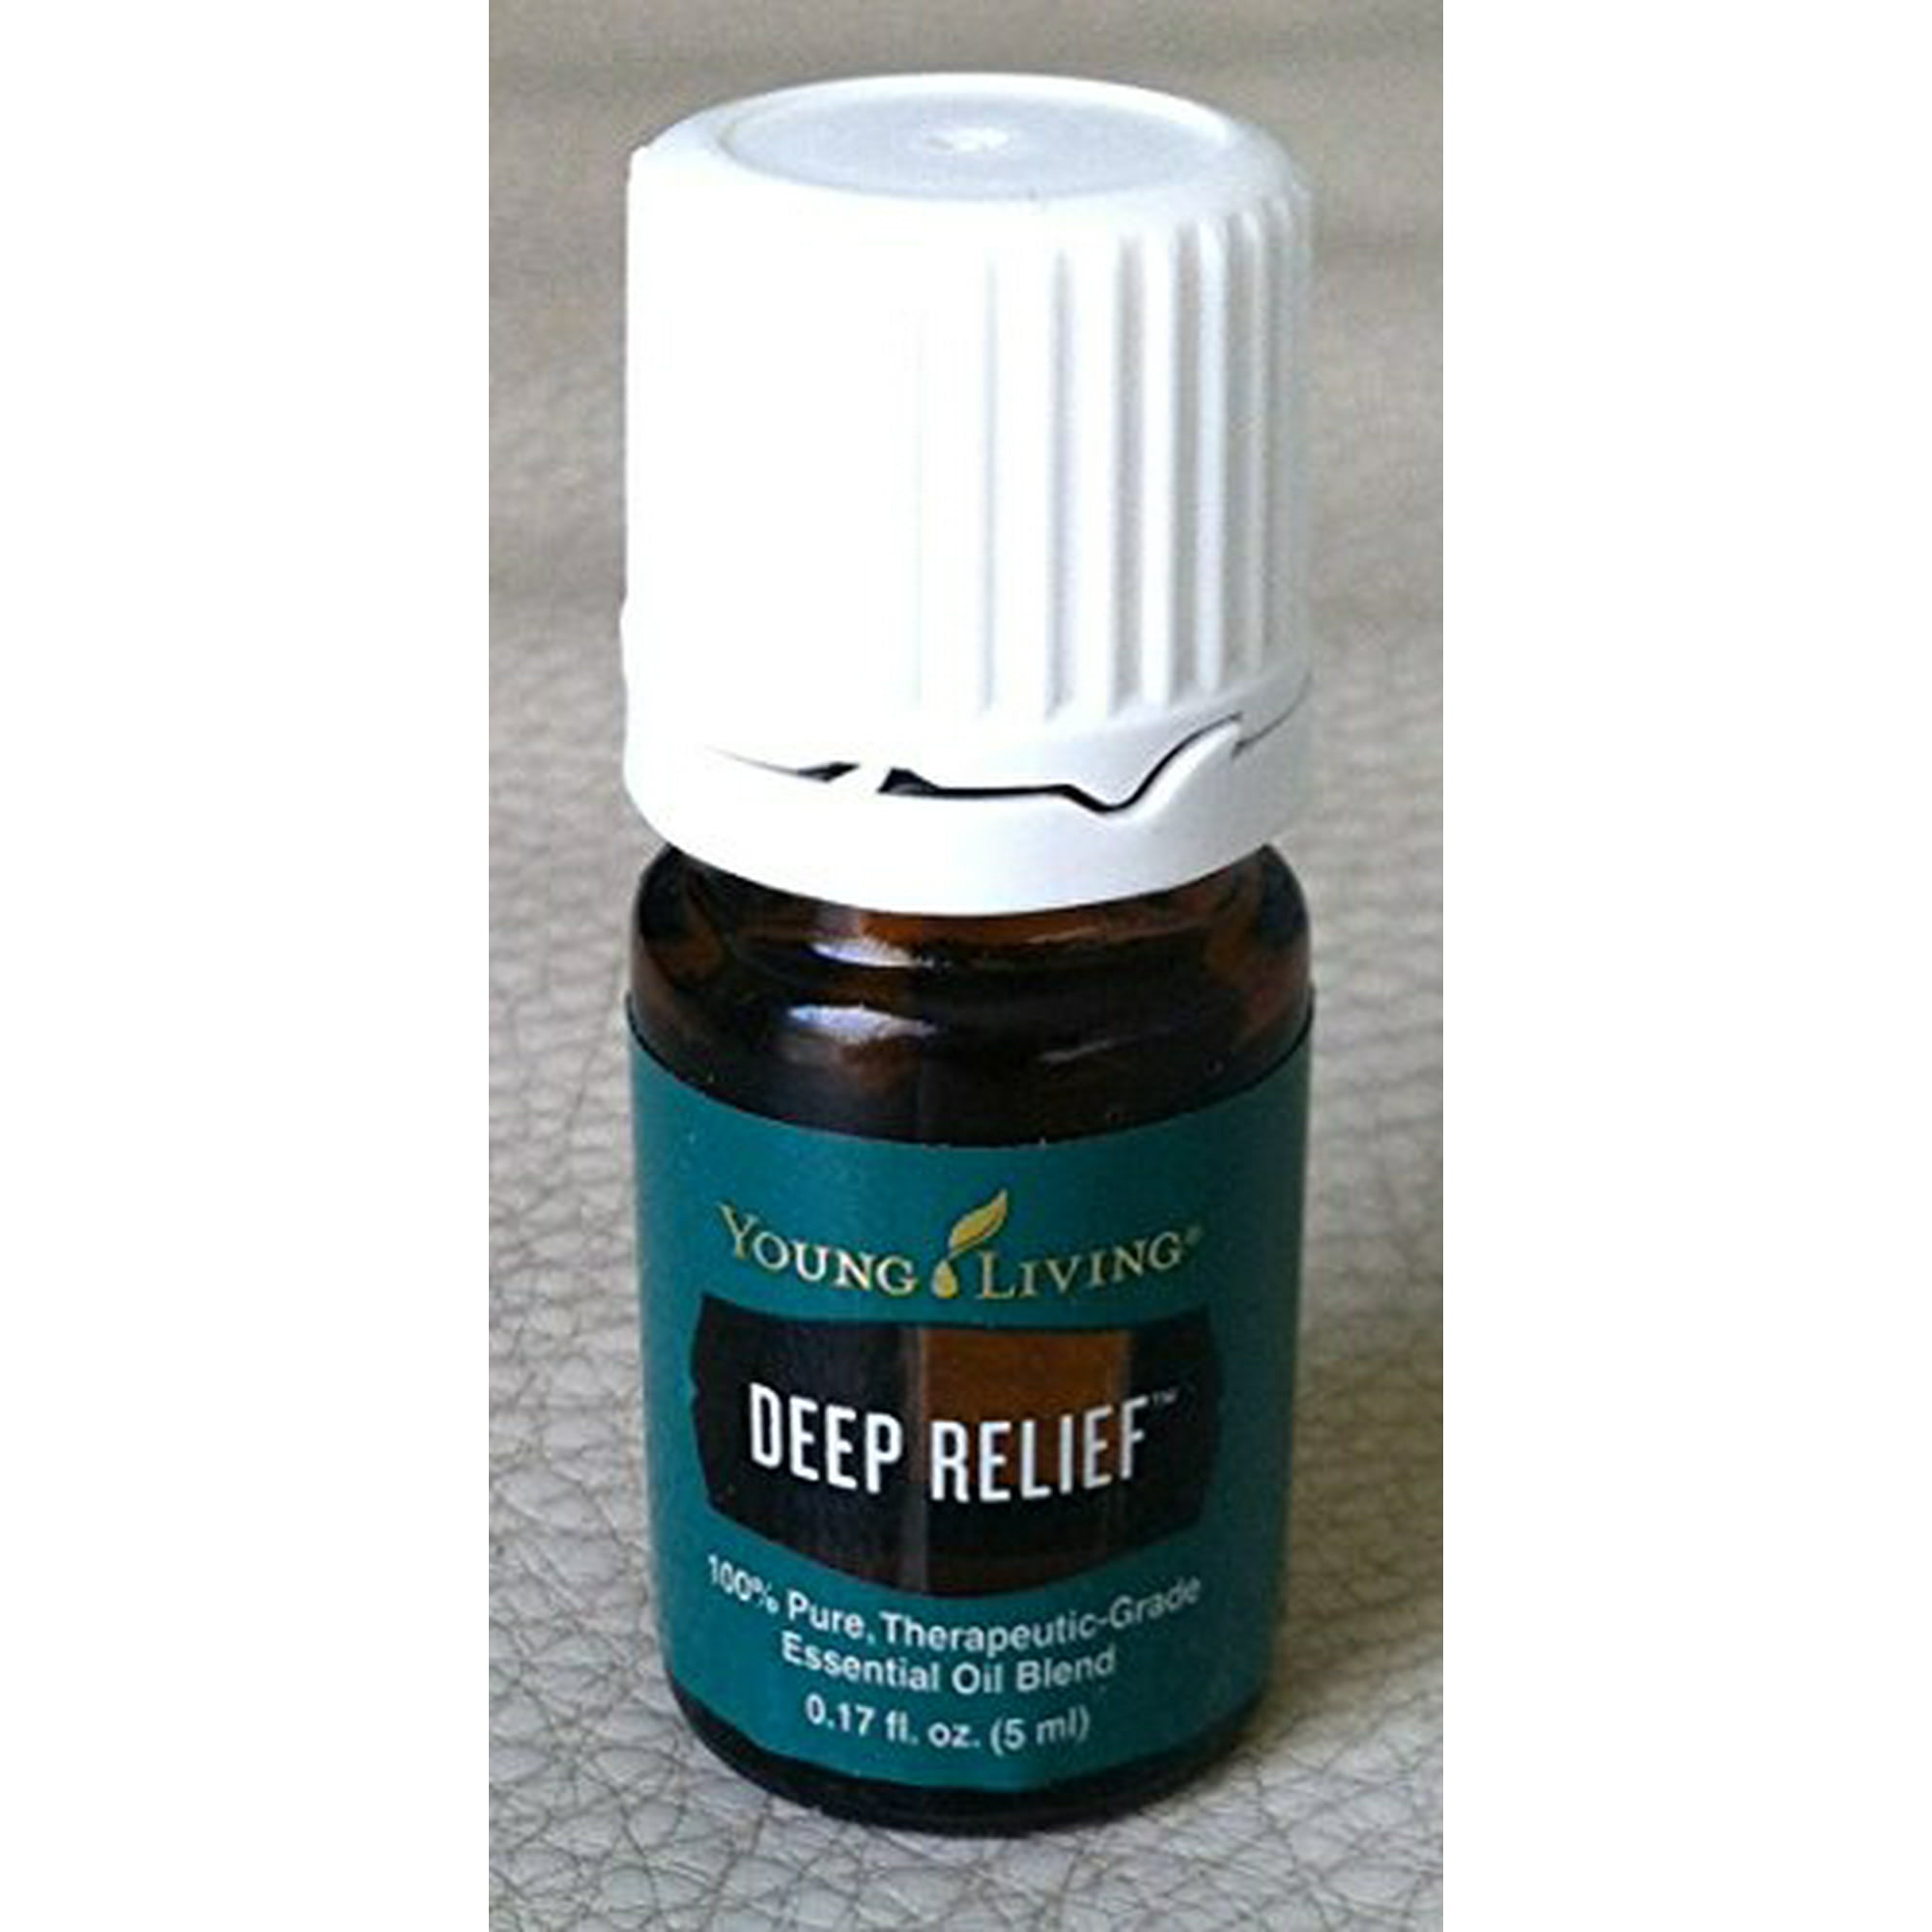 Deep relief young living